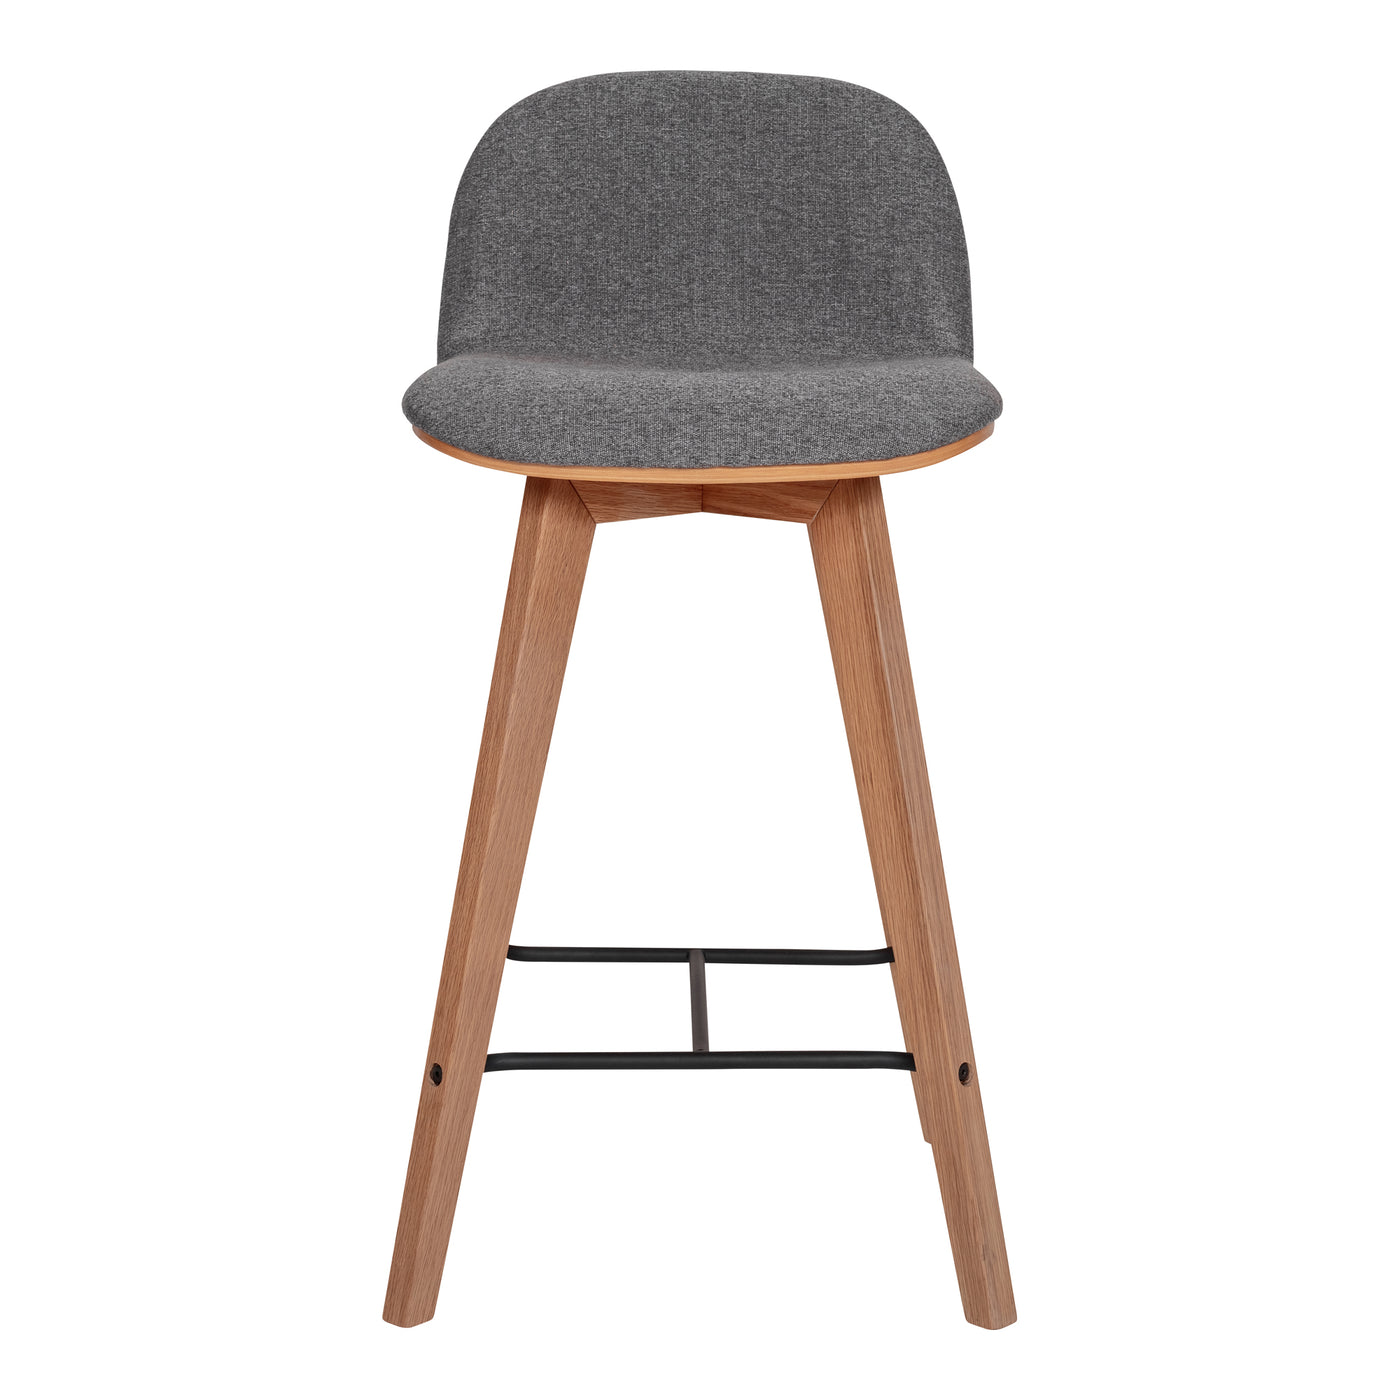 The Napoli counter stool is perfectly modeled for the contemporary home. Sitting on solid oak legs, this chair makes a sof...